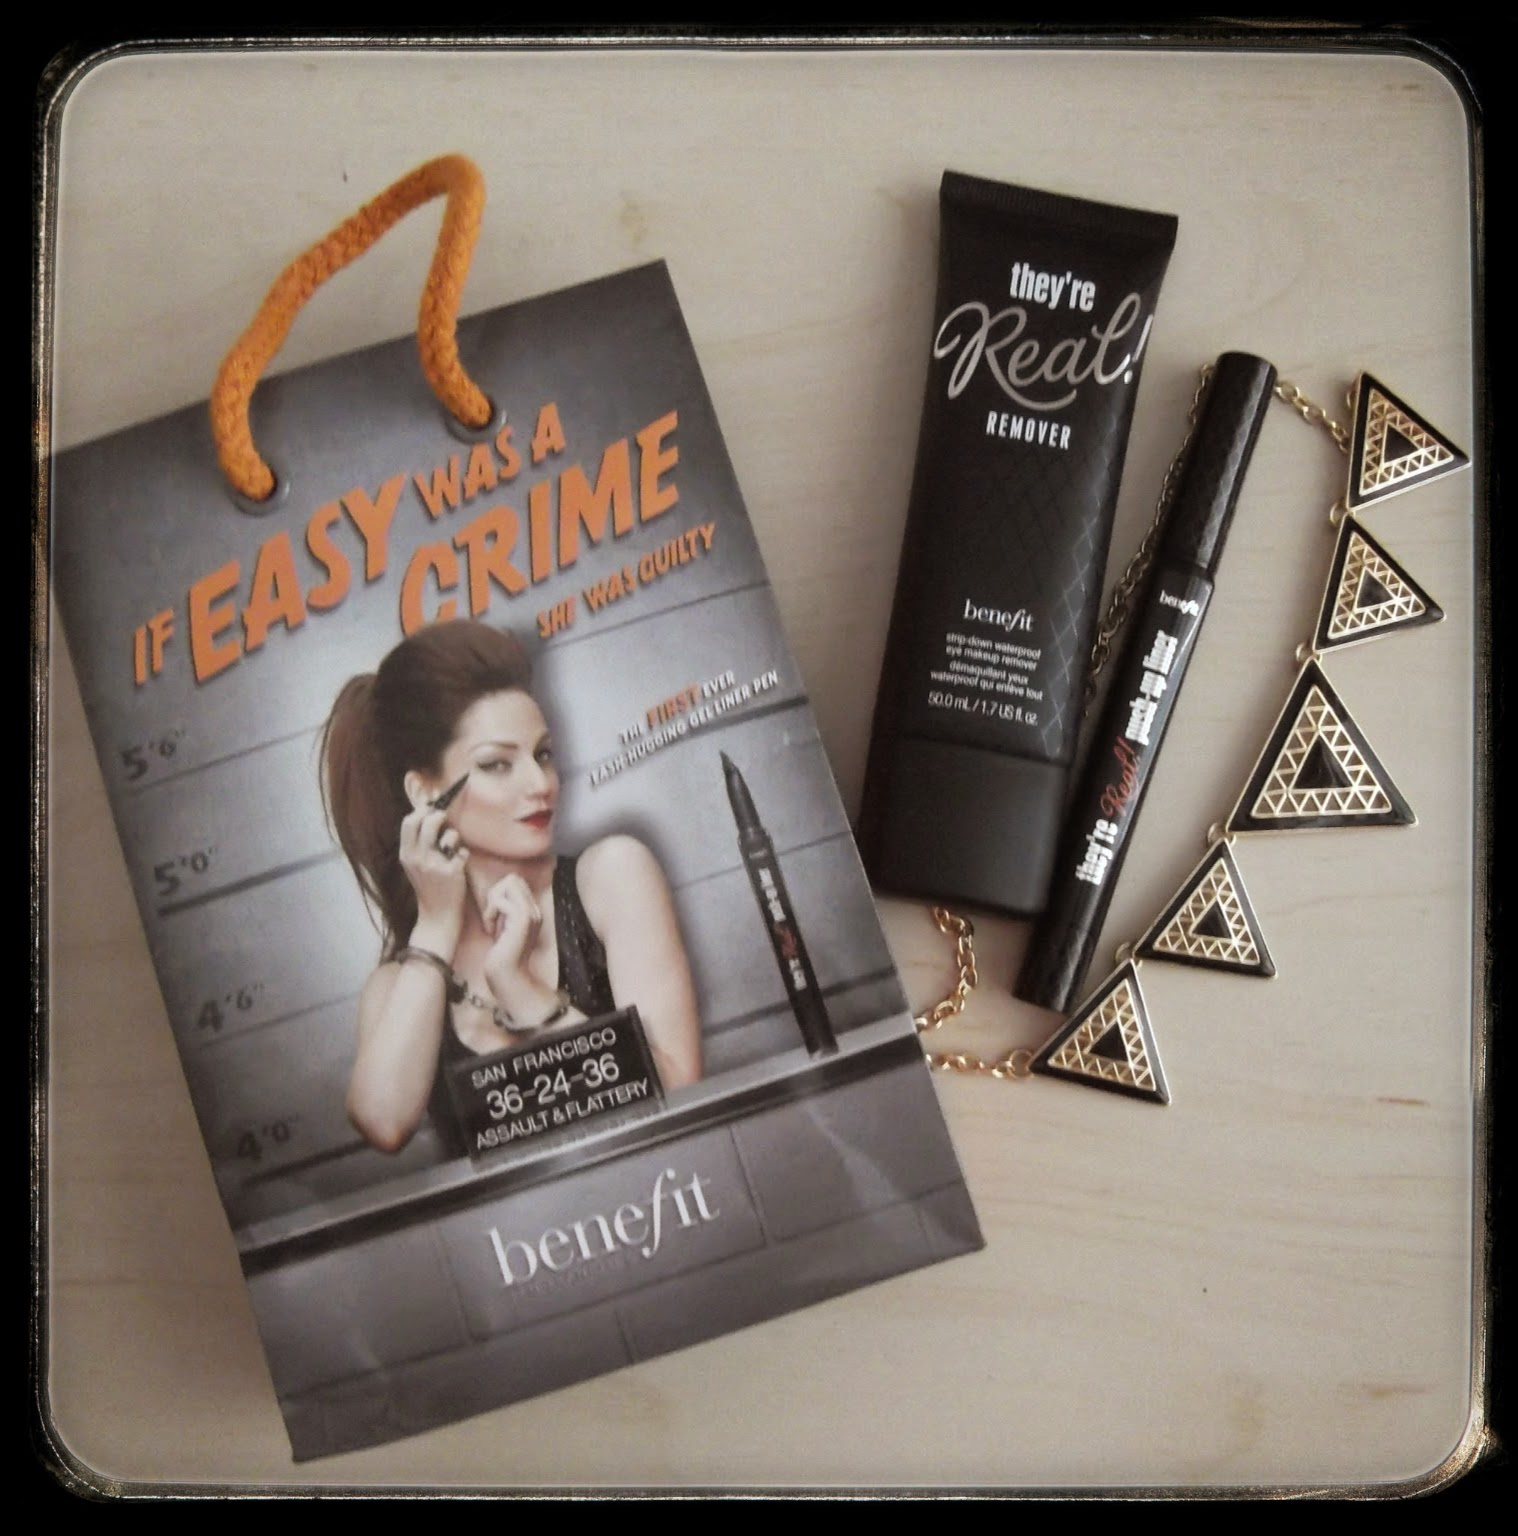 Benefit They're REAL Push-Up Gel Eye-liner remover review